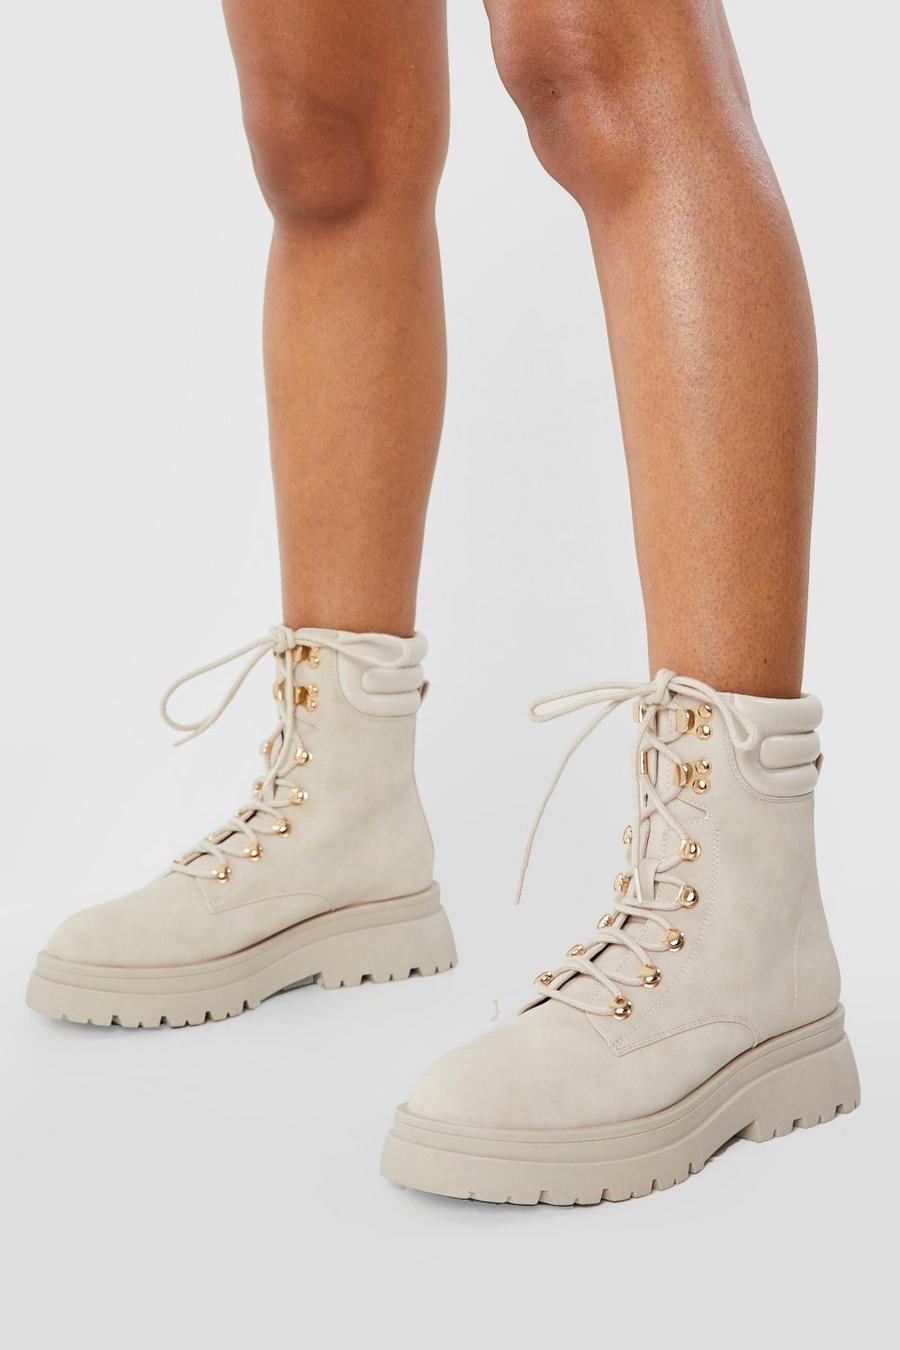 Beige Cleated Sole Lace Up Combat Boots